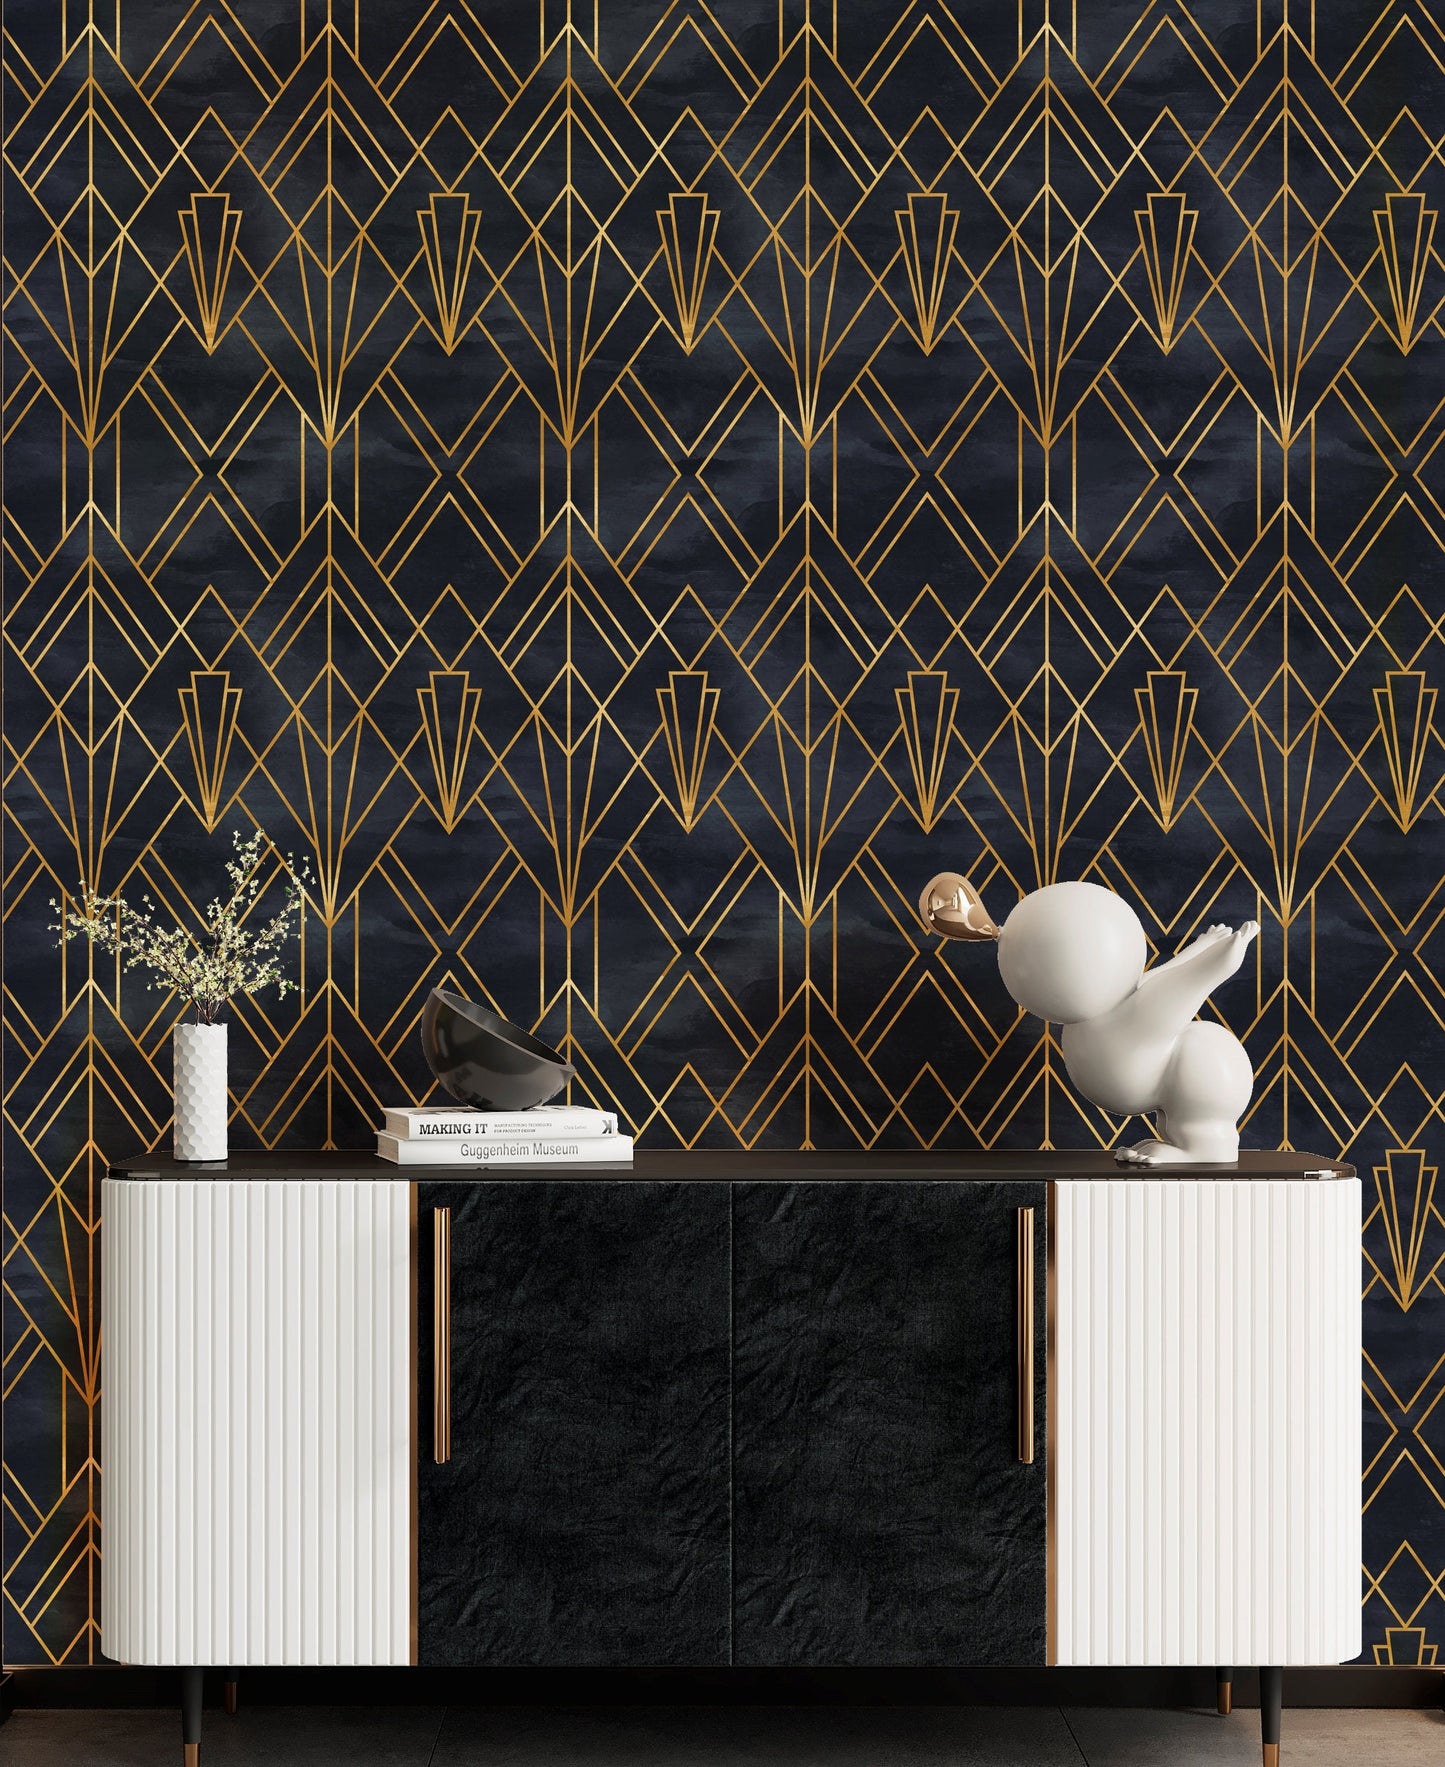 Black and Gold Geometric Wallpaper Peel and Stick, Art Deco Wallpaper, Vintage Wallpaper, Removable Wall Paper